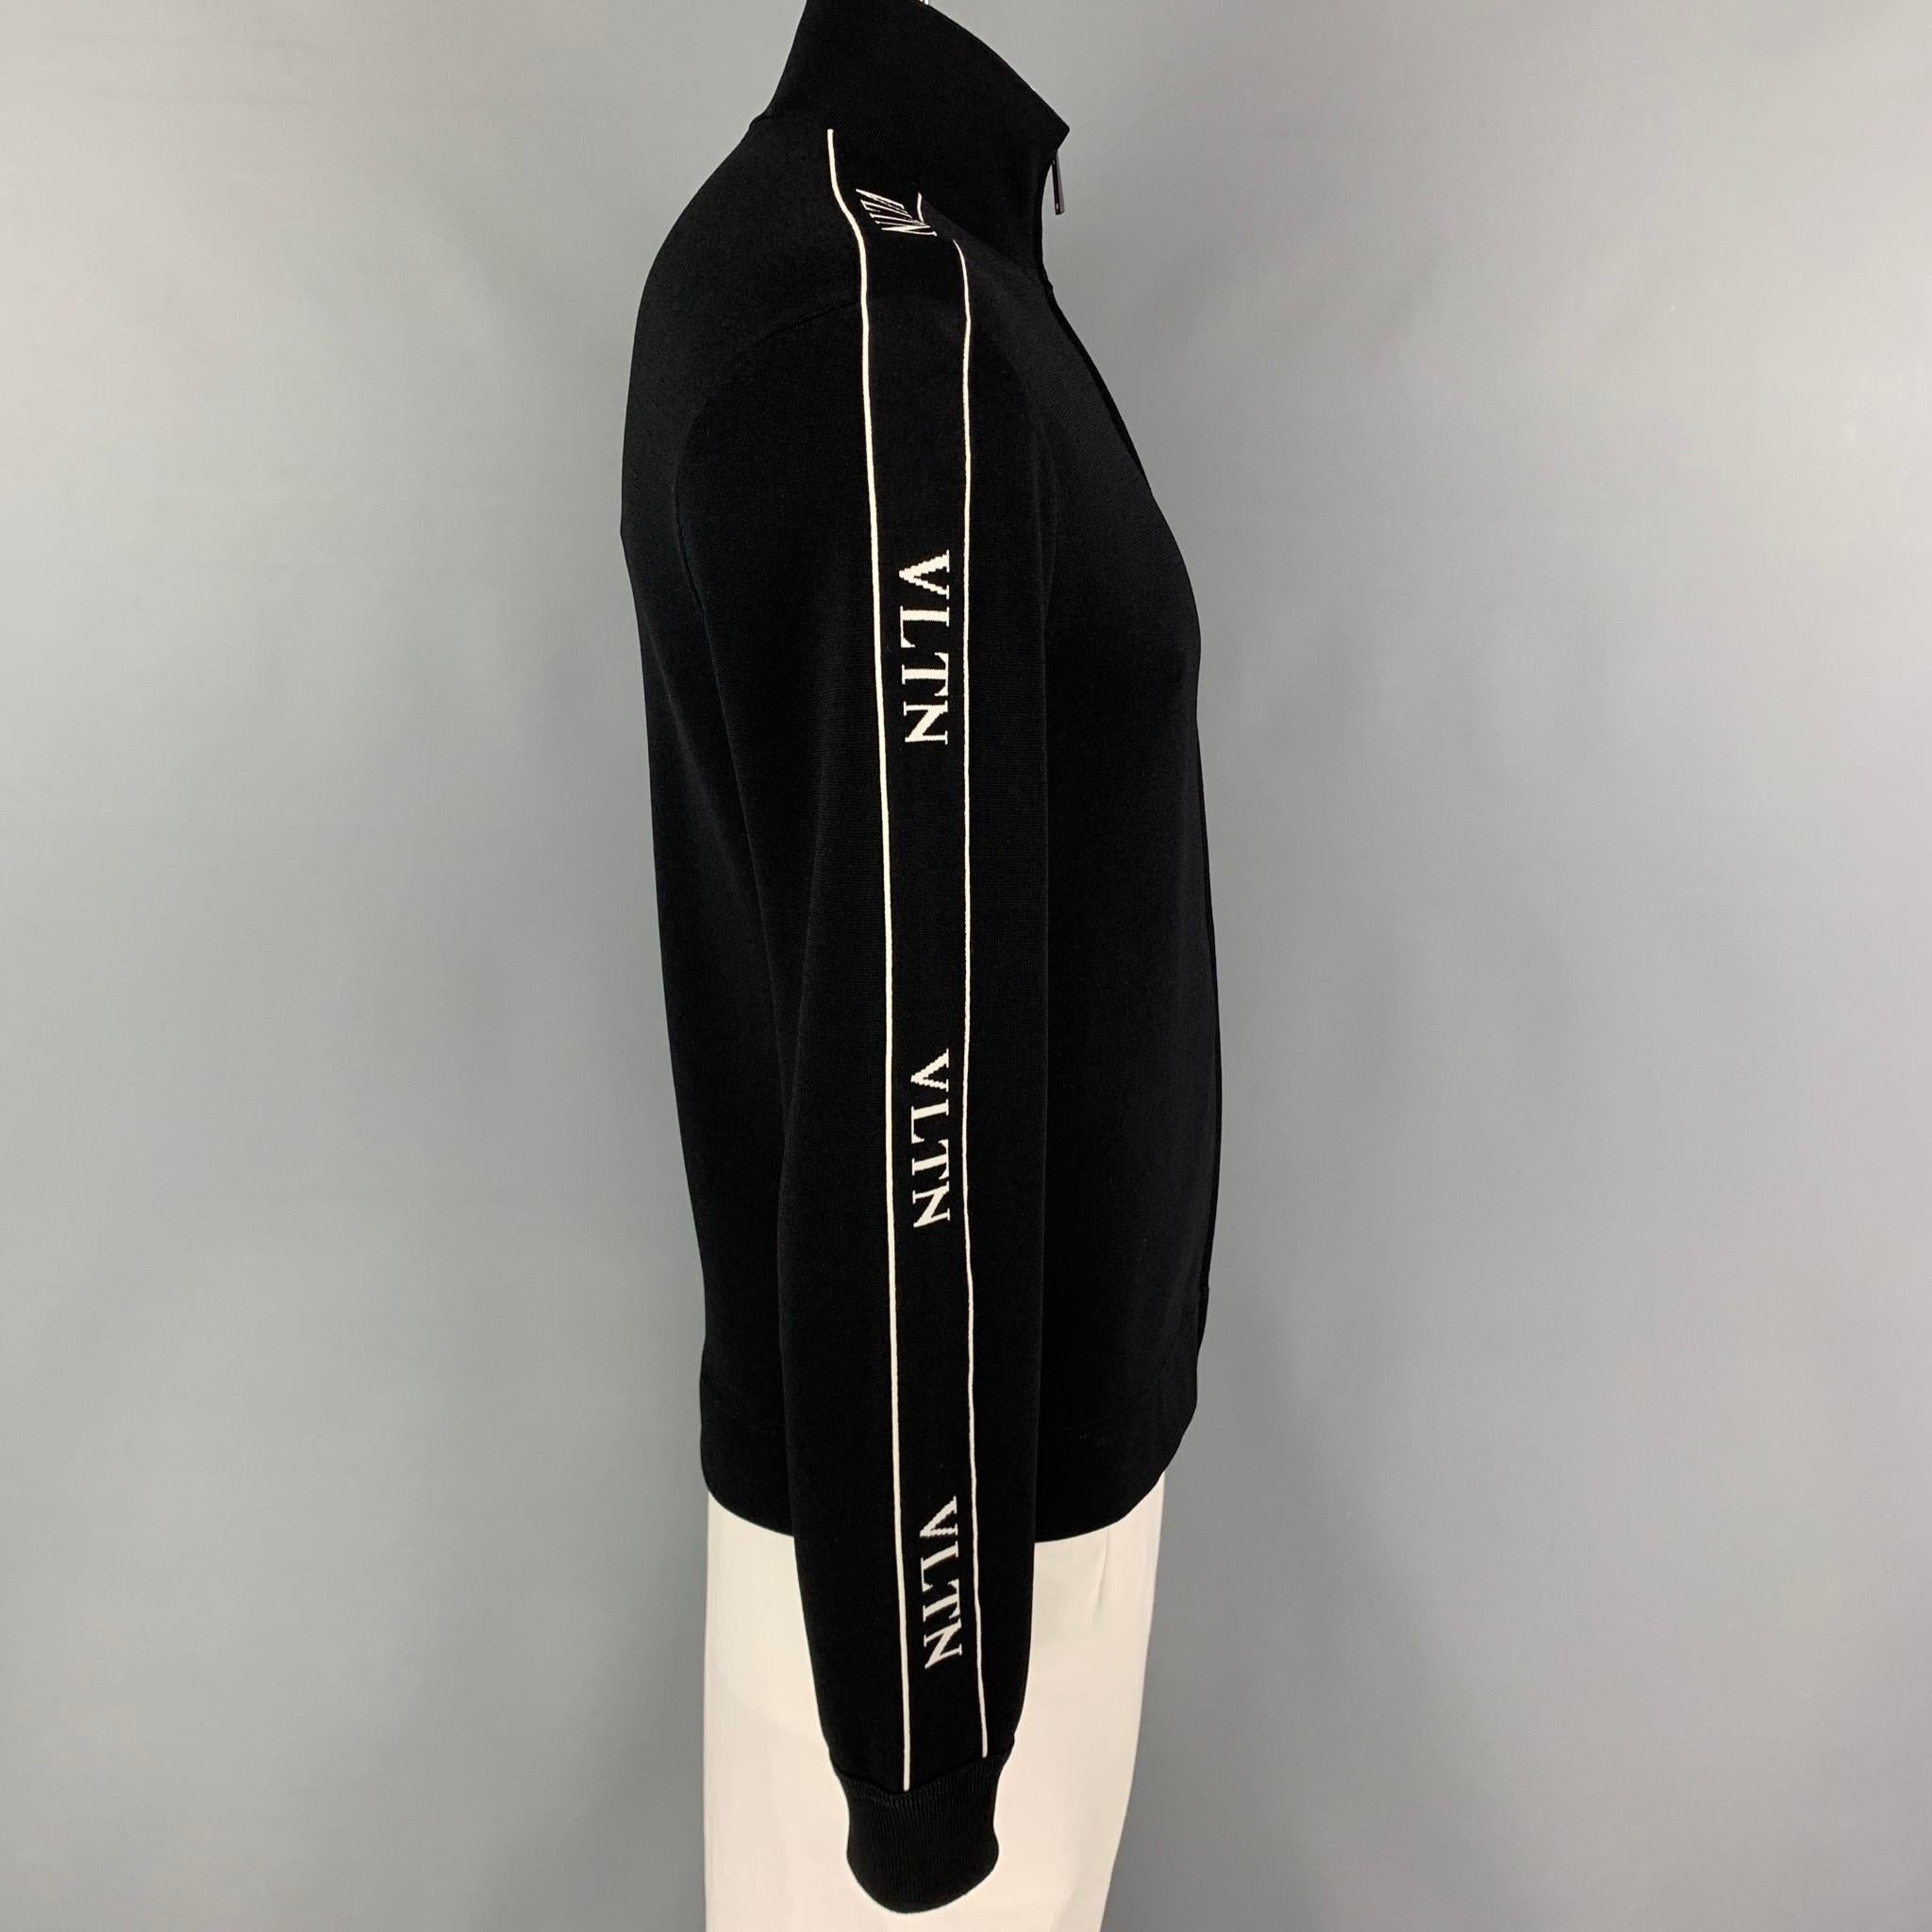 VALENTINO jacket comes in a black viscose blend with white logo details featuring a high collar, slit pockets, and a full zipper closure. Made in Italy. 

Excellent Pre-Owned Condition.
Marked: L

Measurements:

Shoulder: 19 in.
Chest: 40